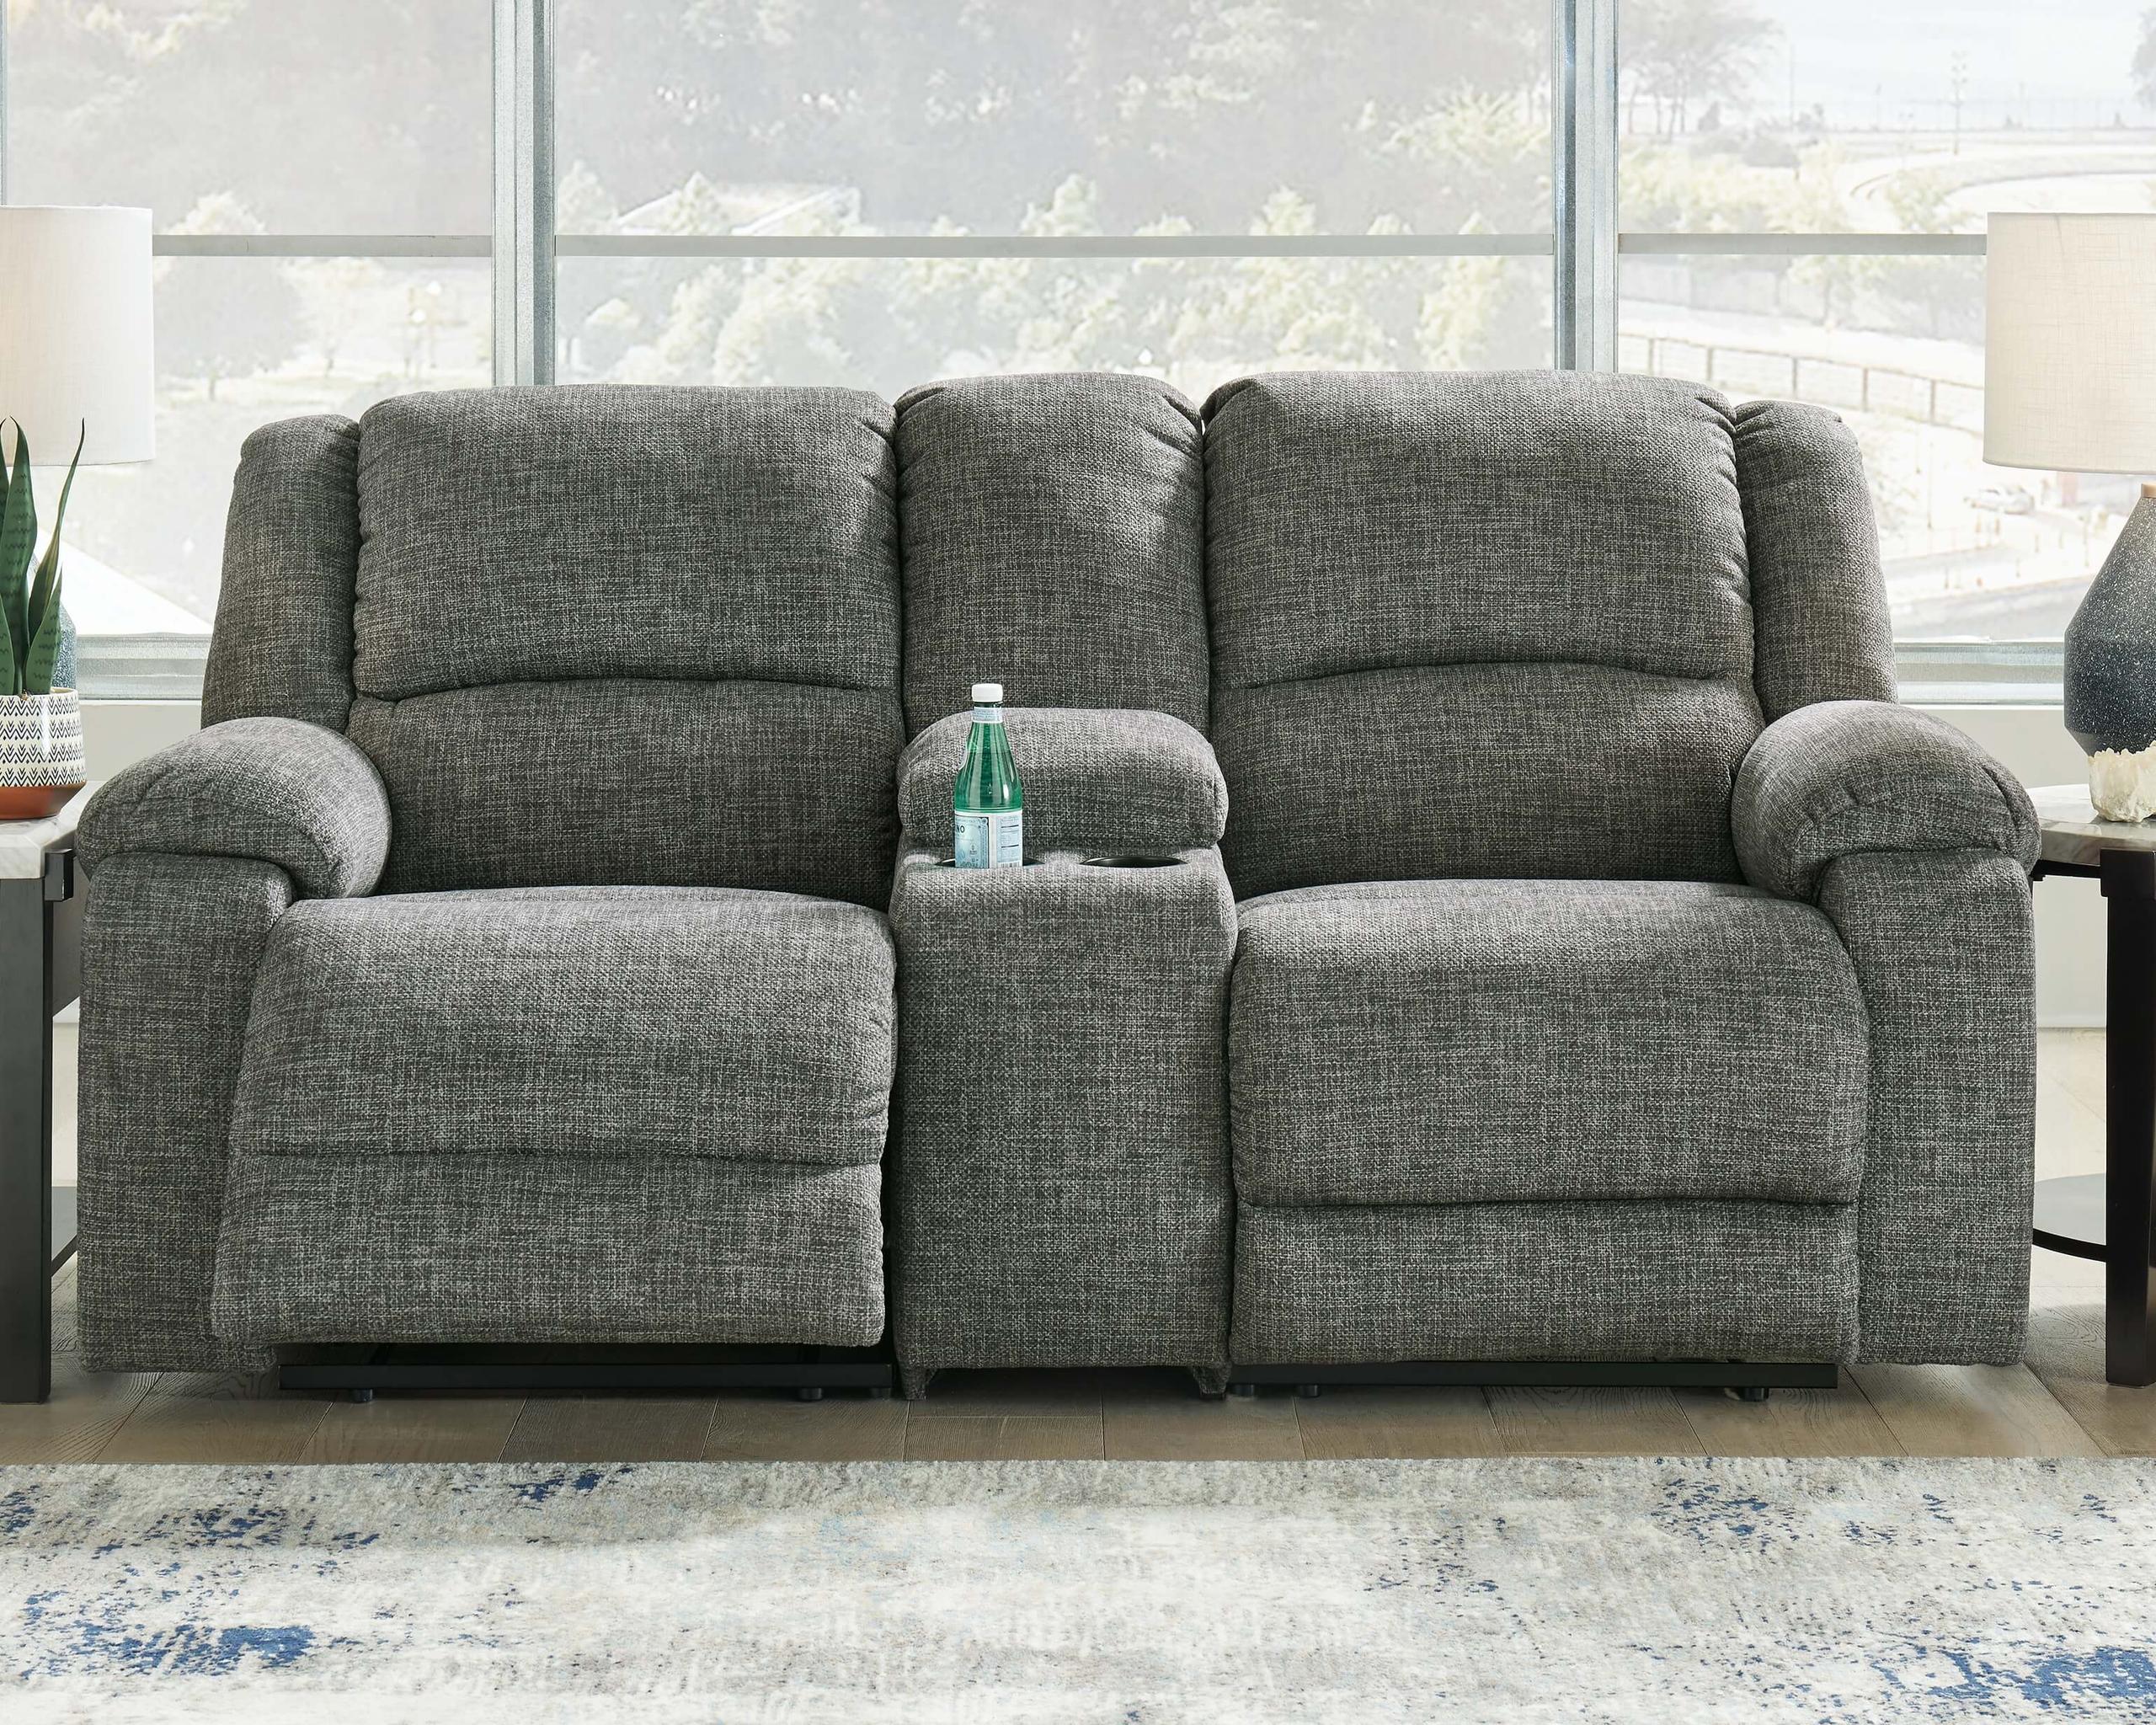 ASHLEY FURNITURE 79103S10 Goalie 3-piece Reclining Loveseat With Console